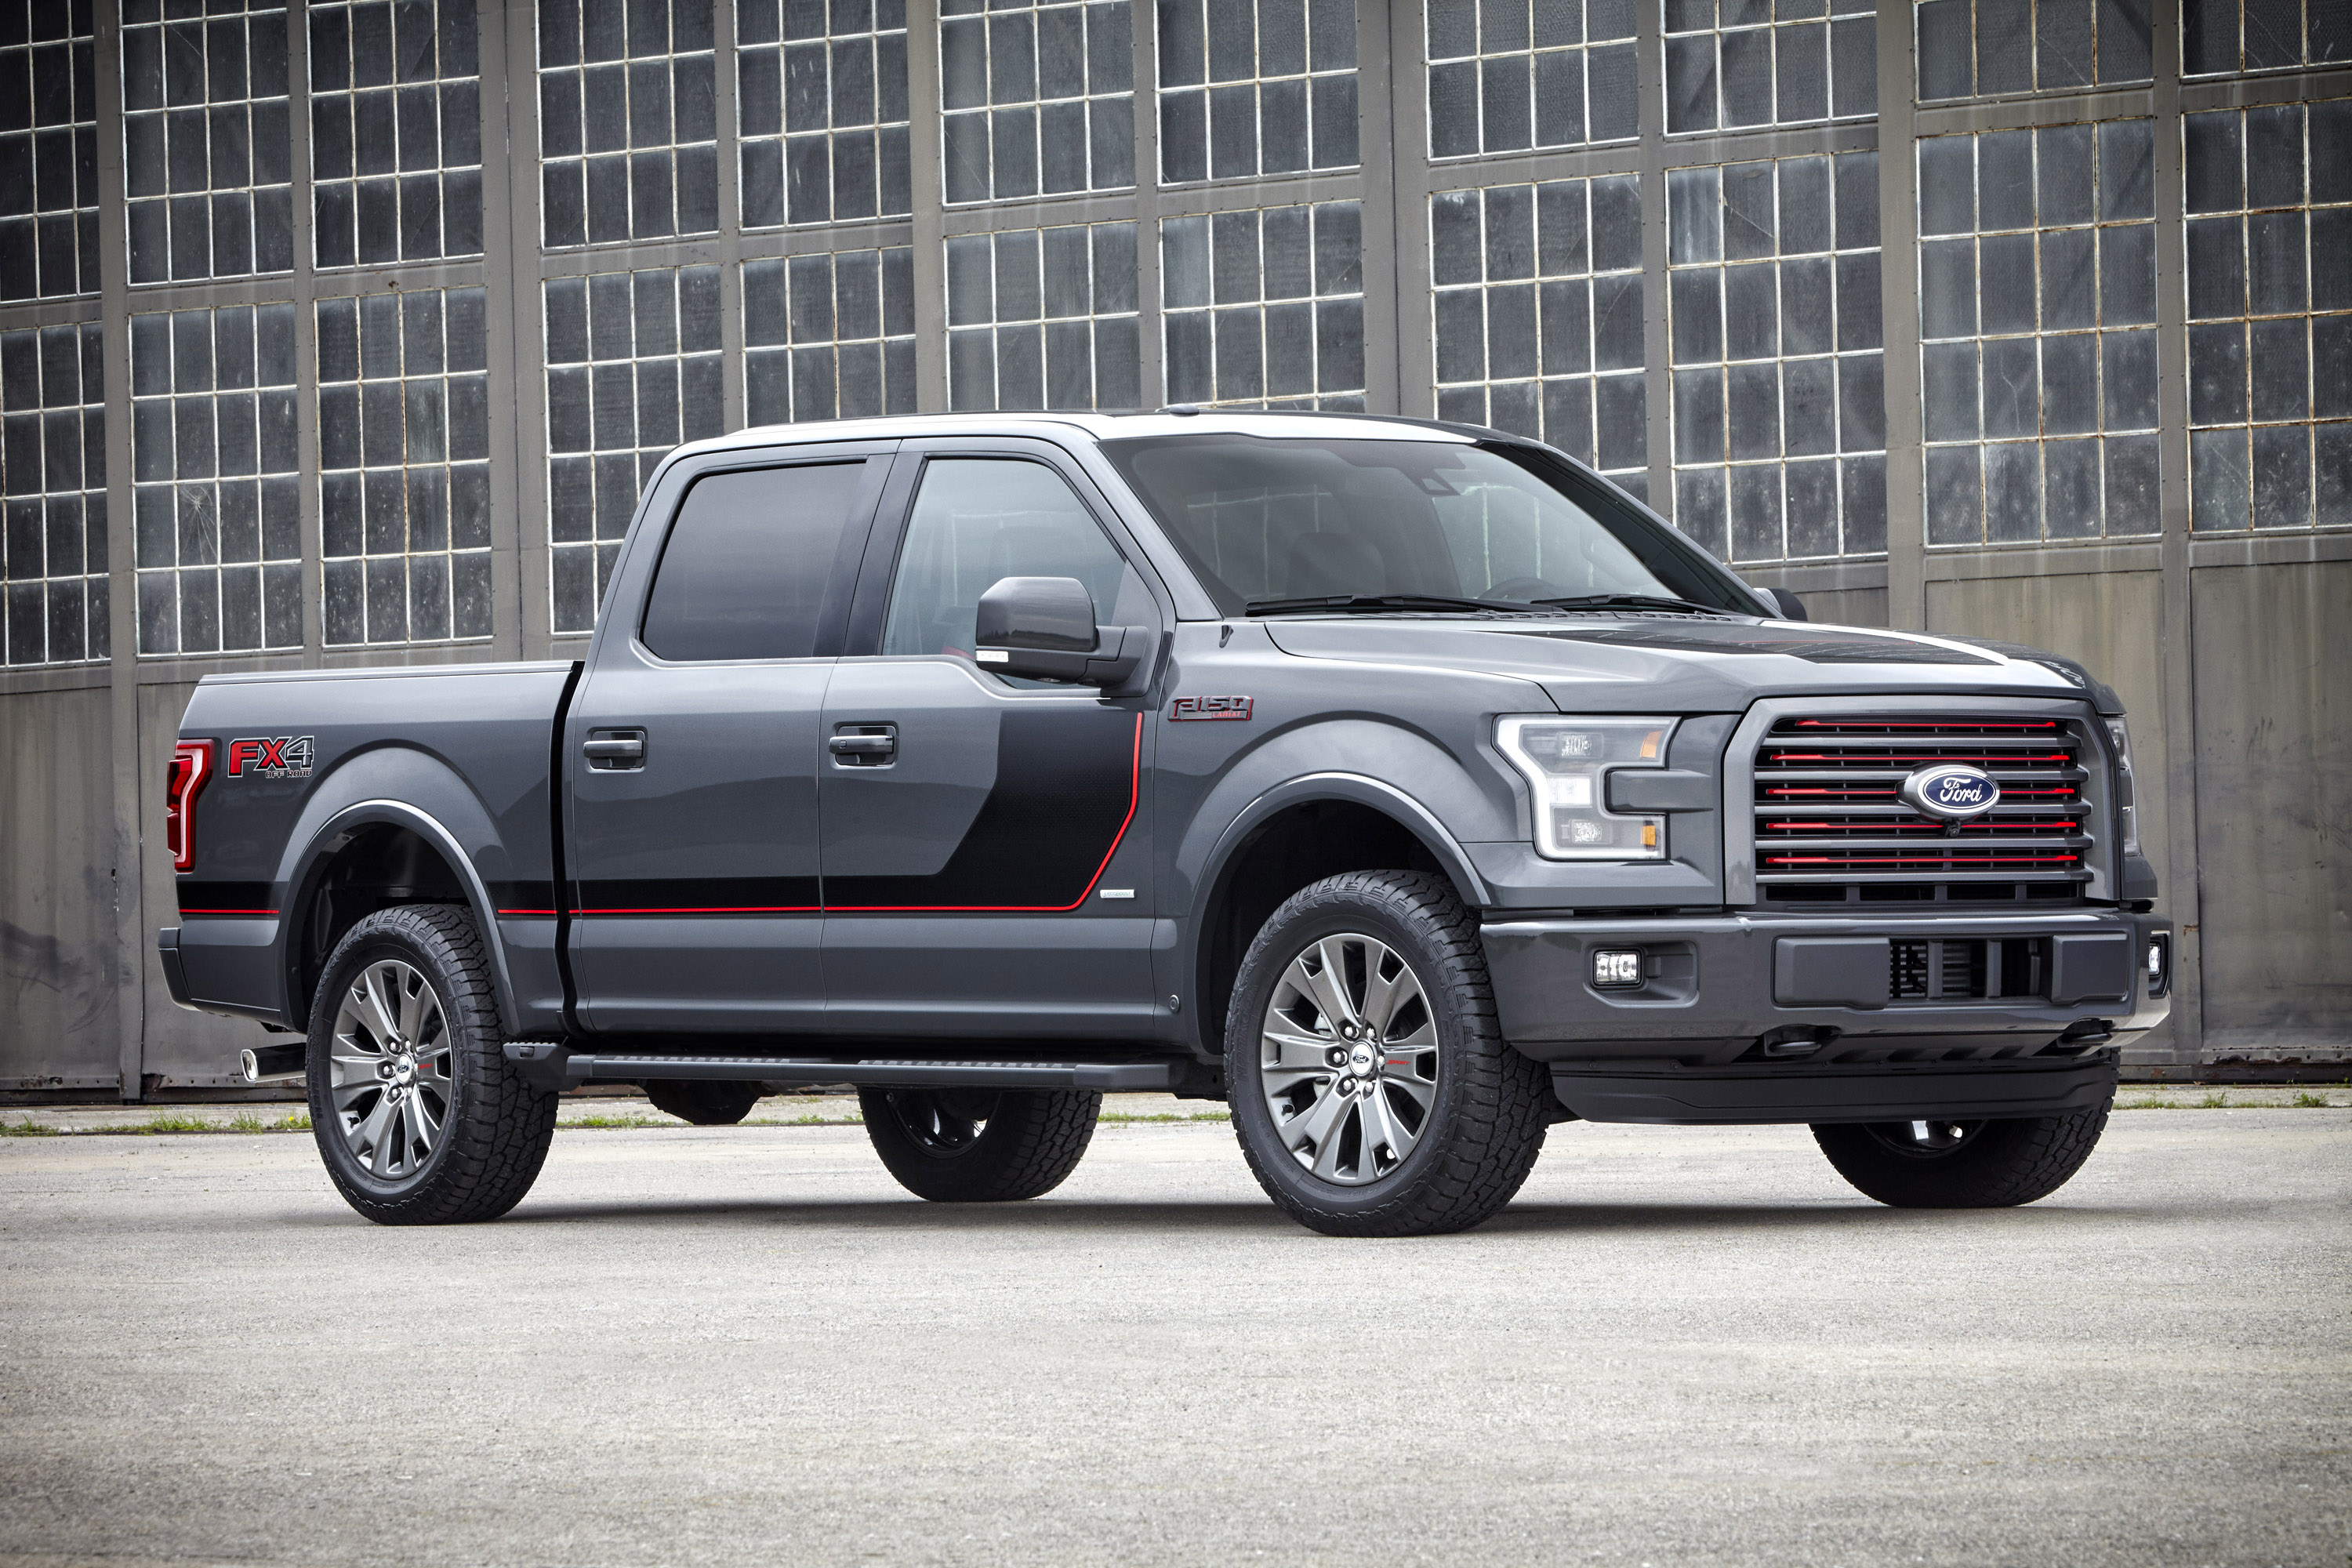 2016 Ford F-150 Lariat Appearance Package - HD Pictures @ carsinvasion.com